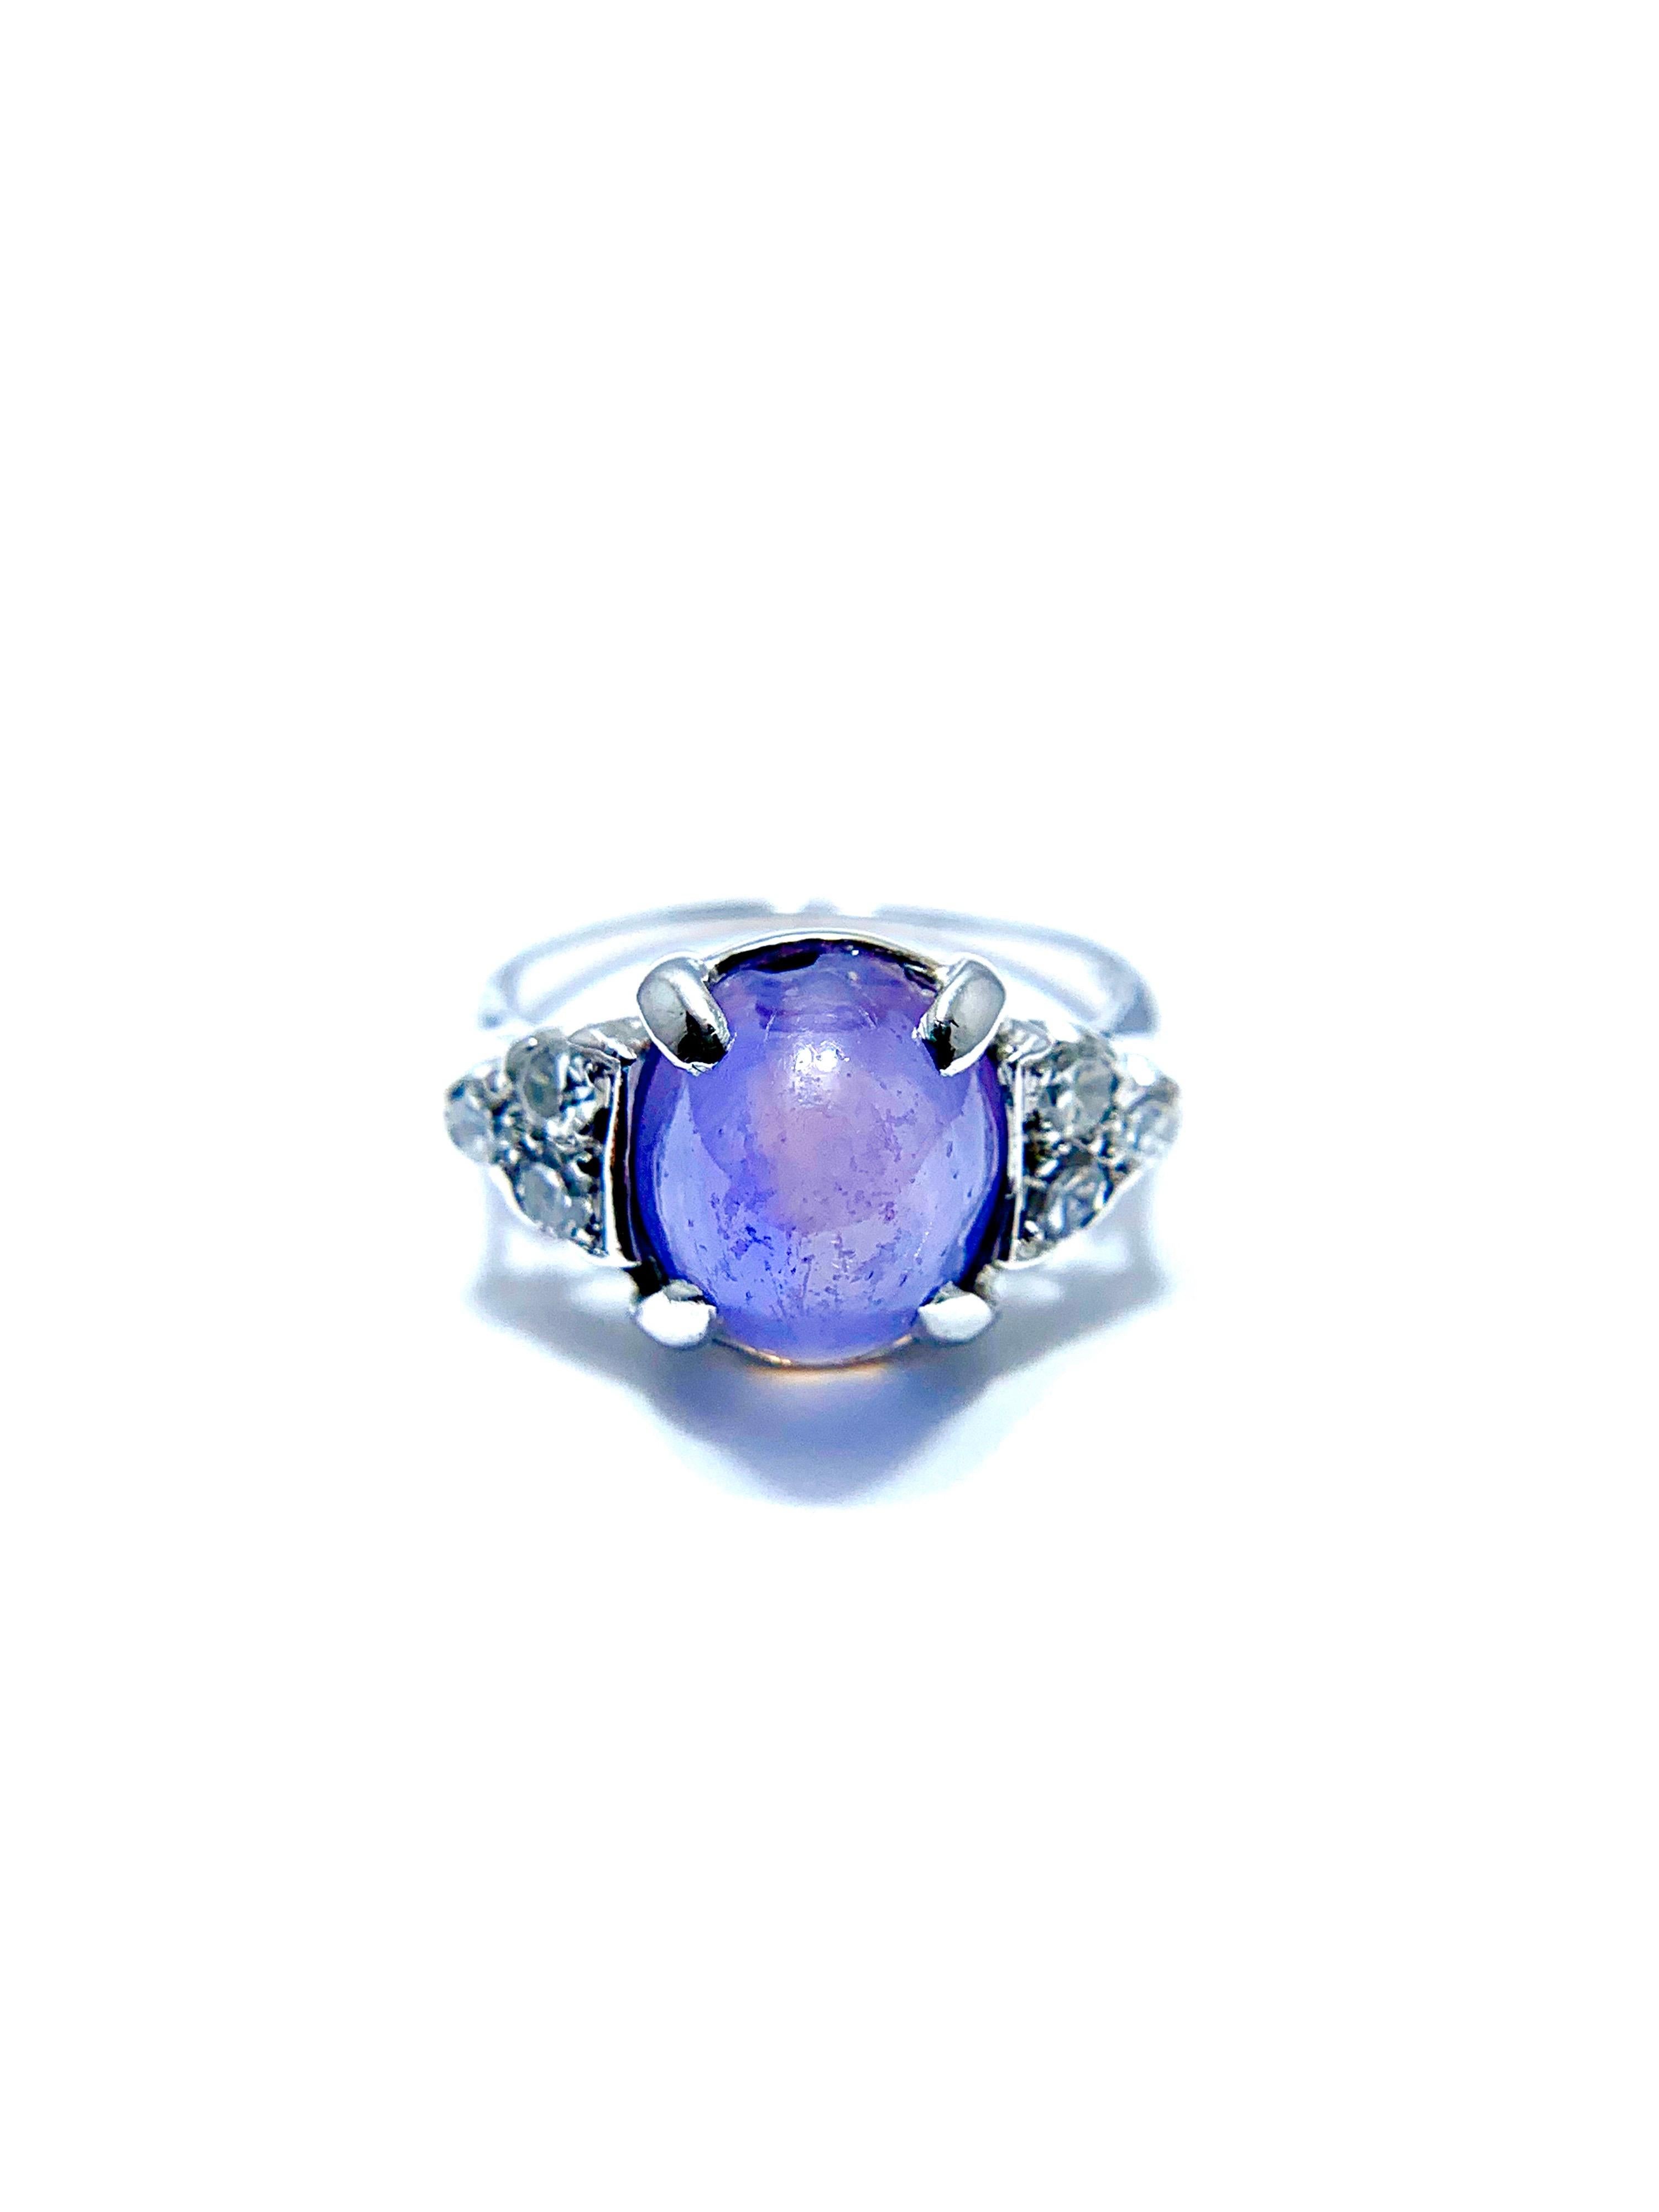 A gorgeous lavander cabochon Sappjhire and Diamond cocktail ring set in 14k white gold!  The 5.36 carat cabochon Sapphire is set in four prongs with three single cut round brilliant Diamonds on each side totaling 0.10 carats.  The shank is stamped